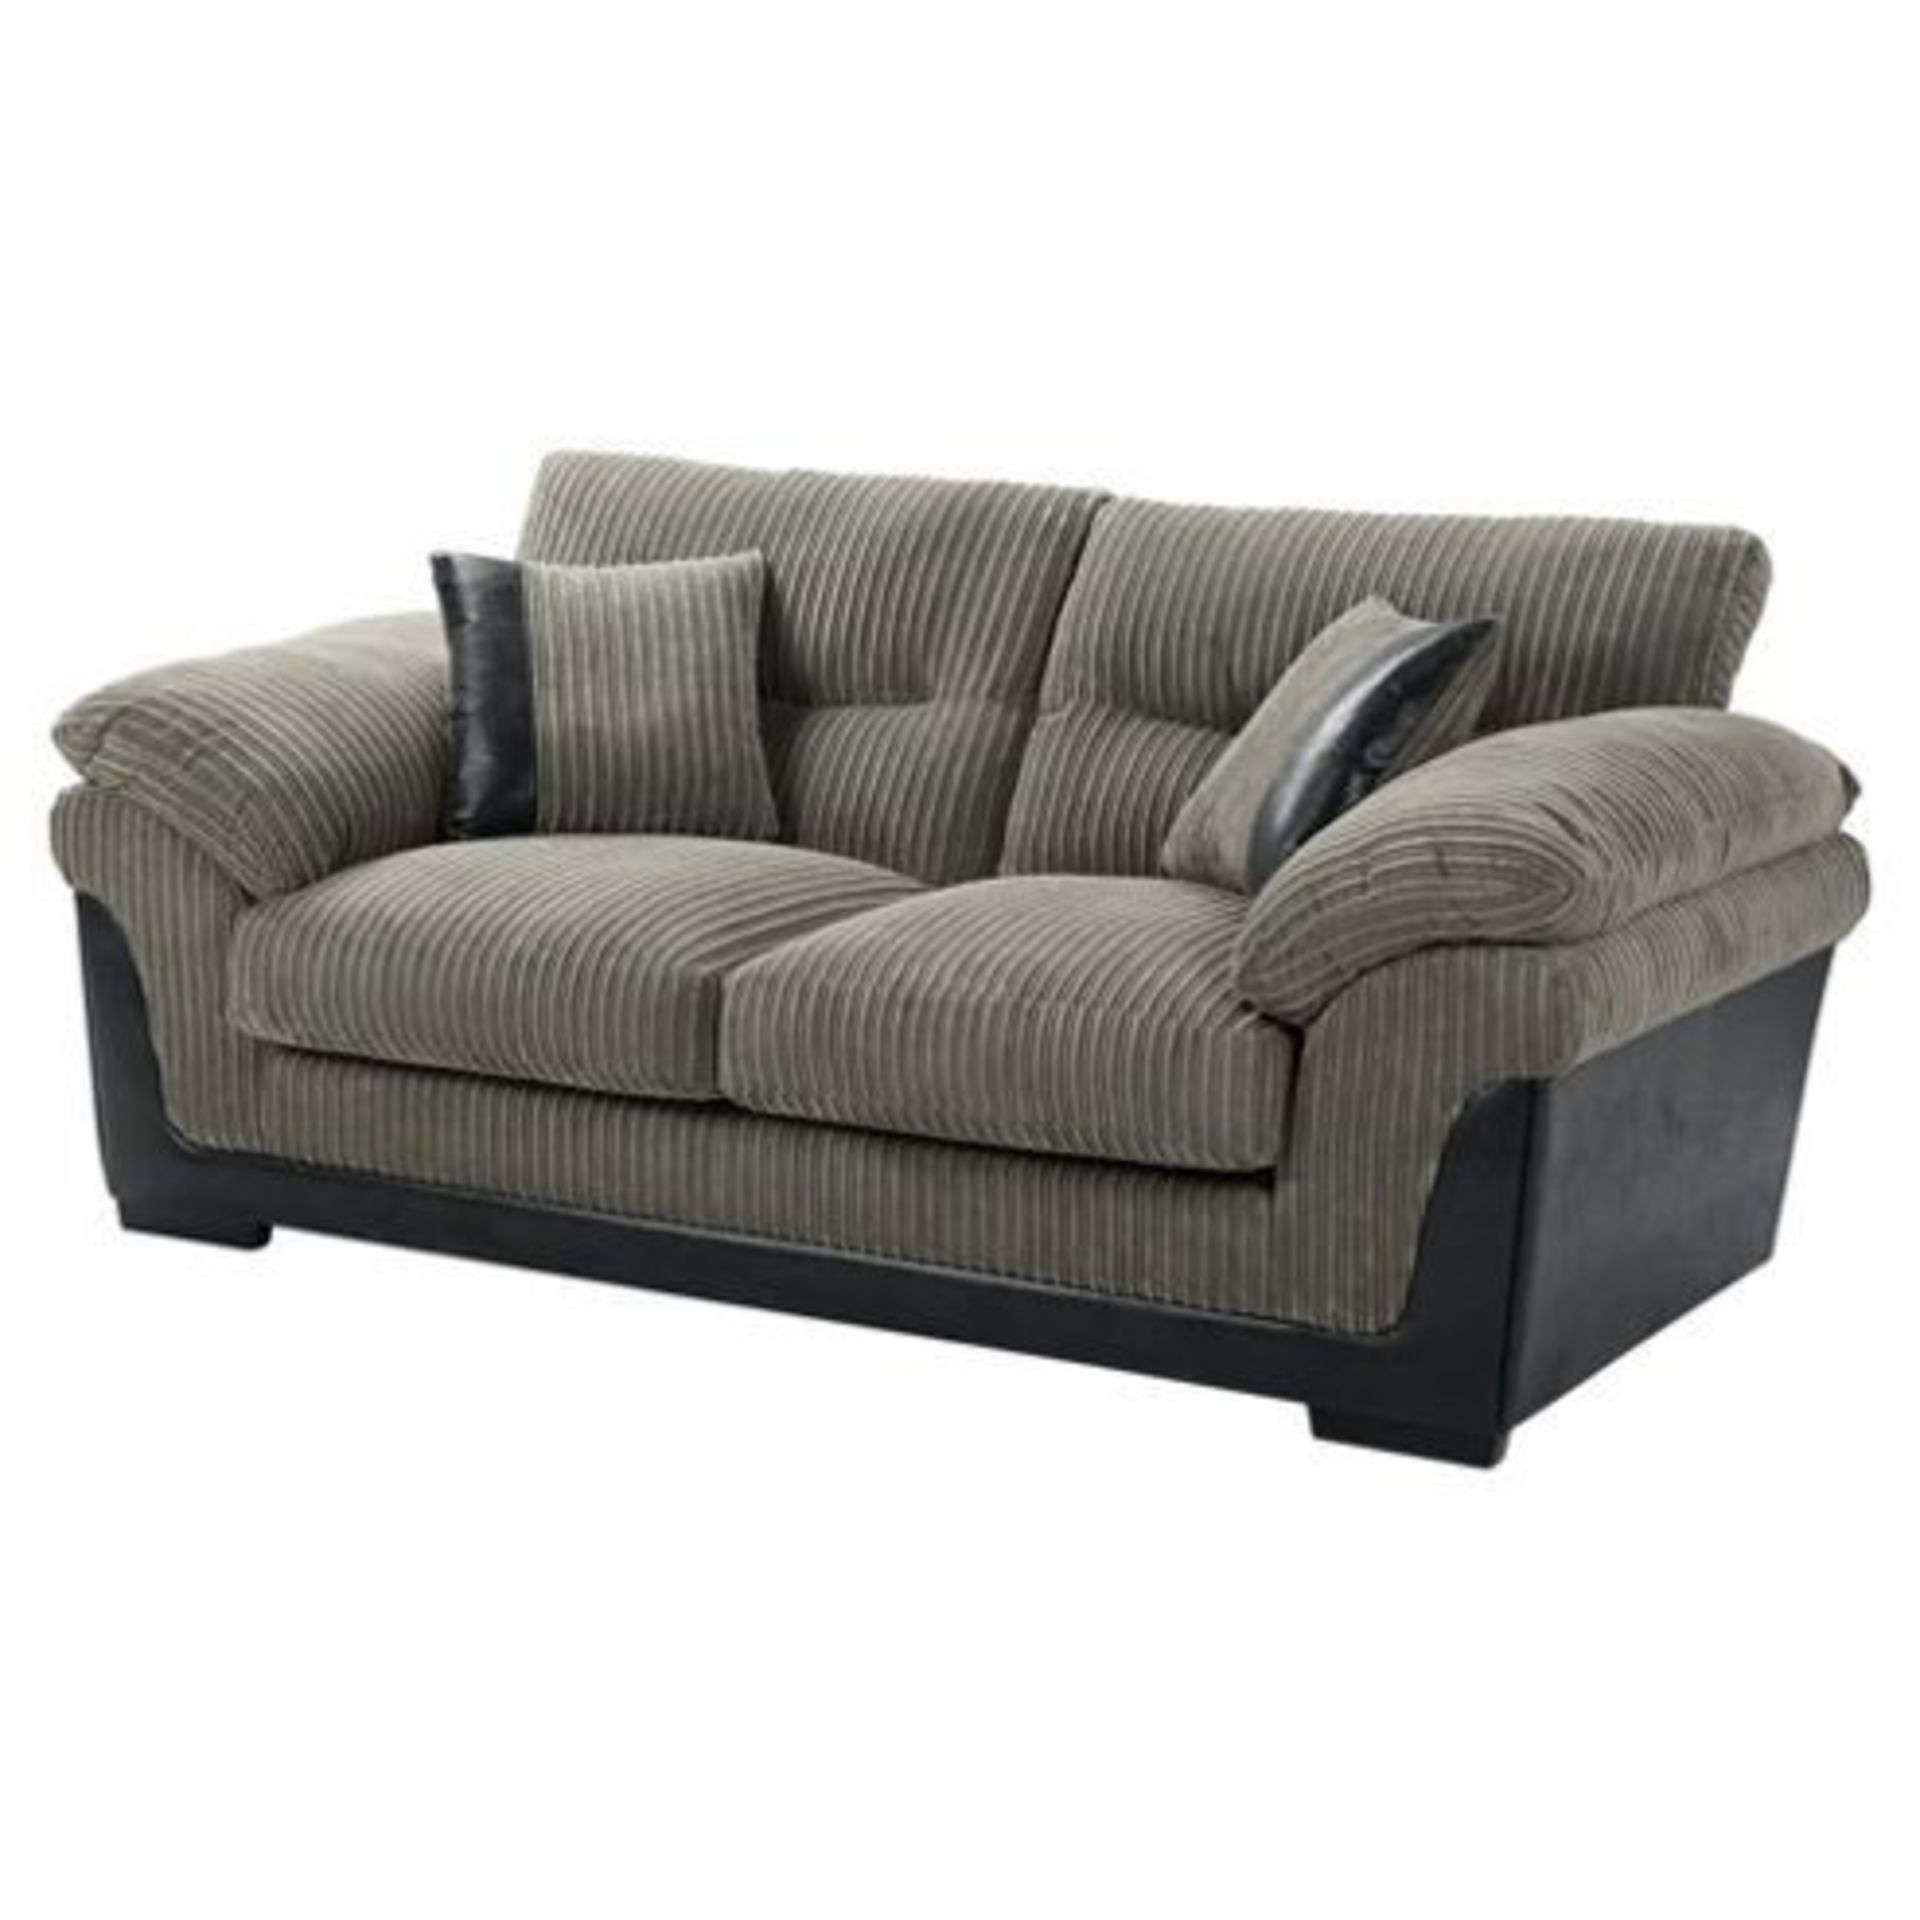 1 BRAND NEW BAGGED KENDAL 2.5 SEATER JUMBO CORD SOFA IN TAUPE (VIEWING HIGHLY RECOMMENDED)